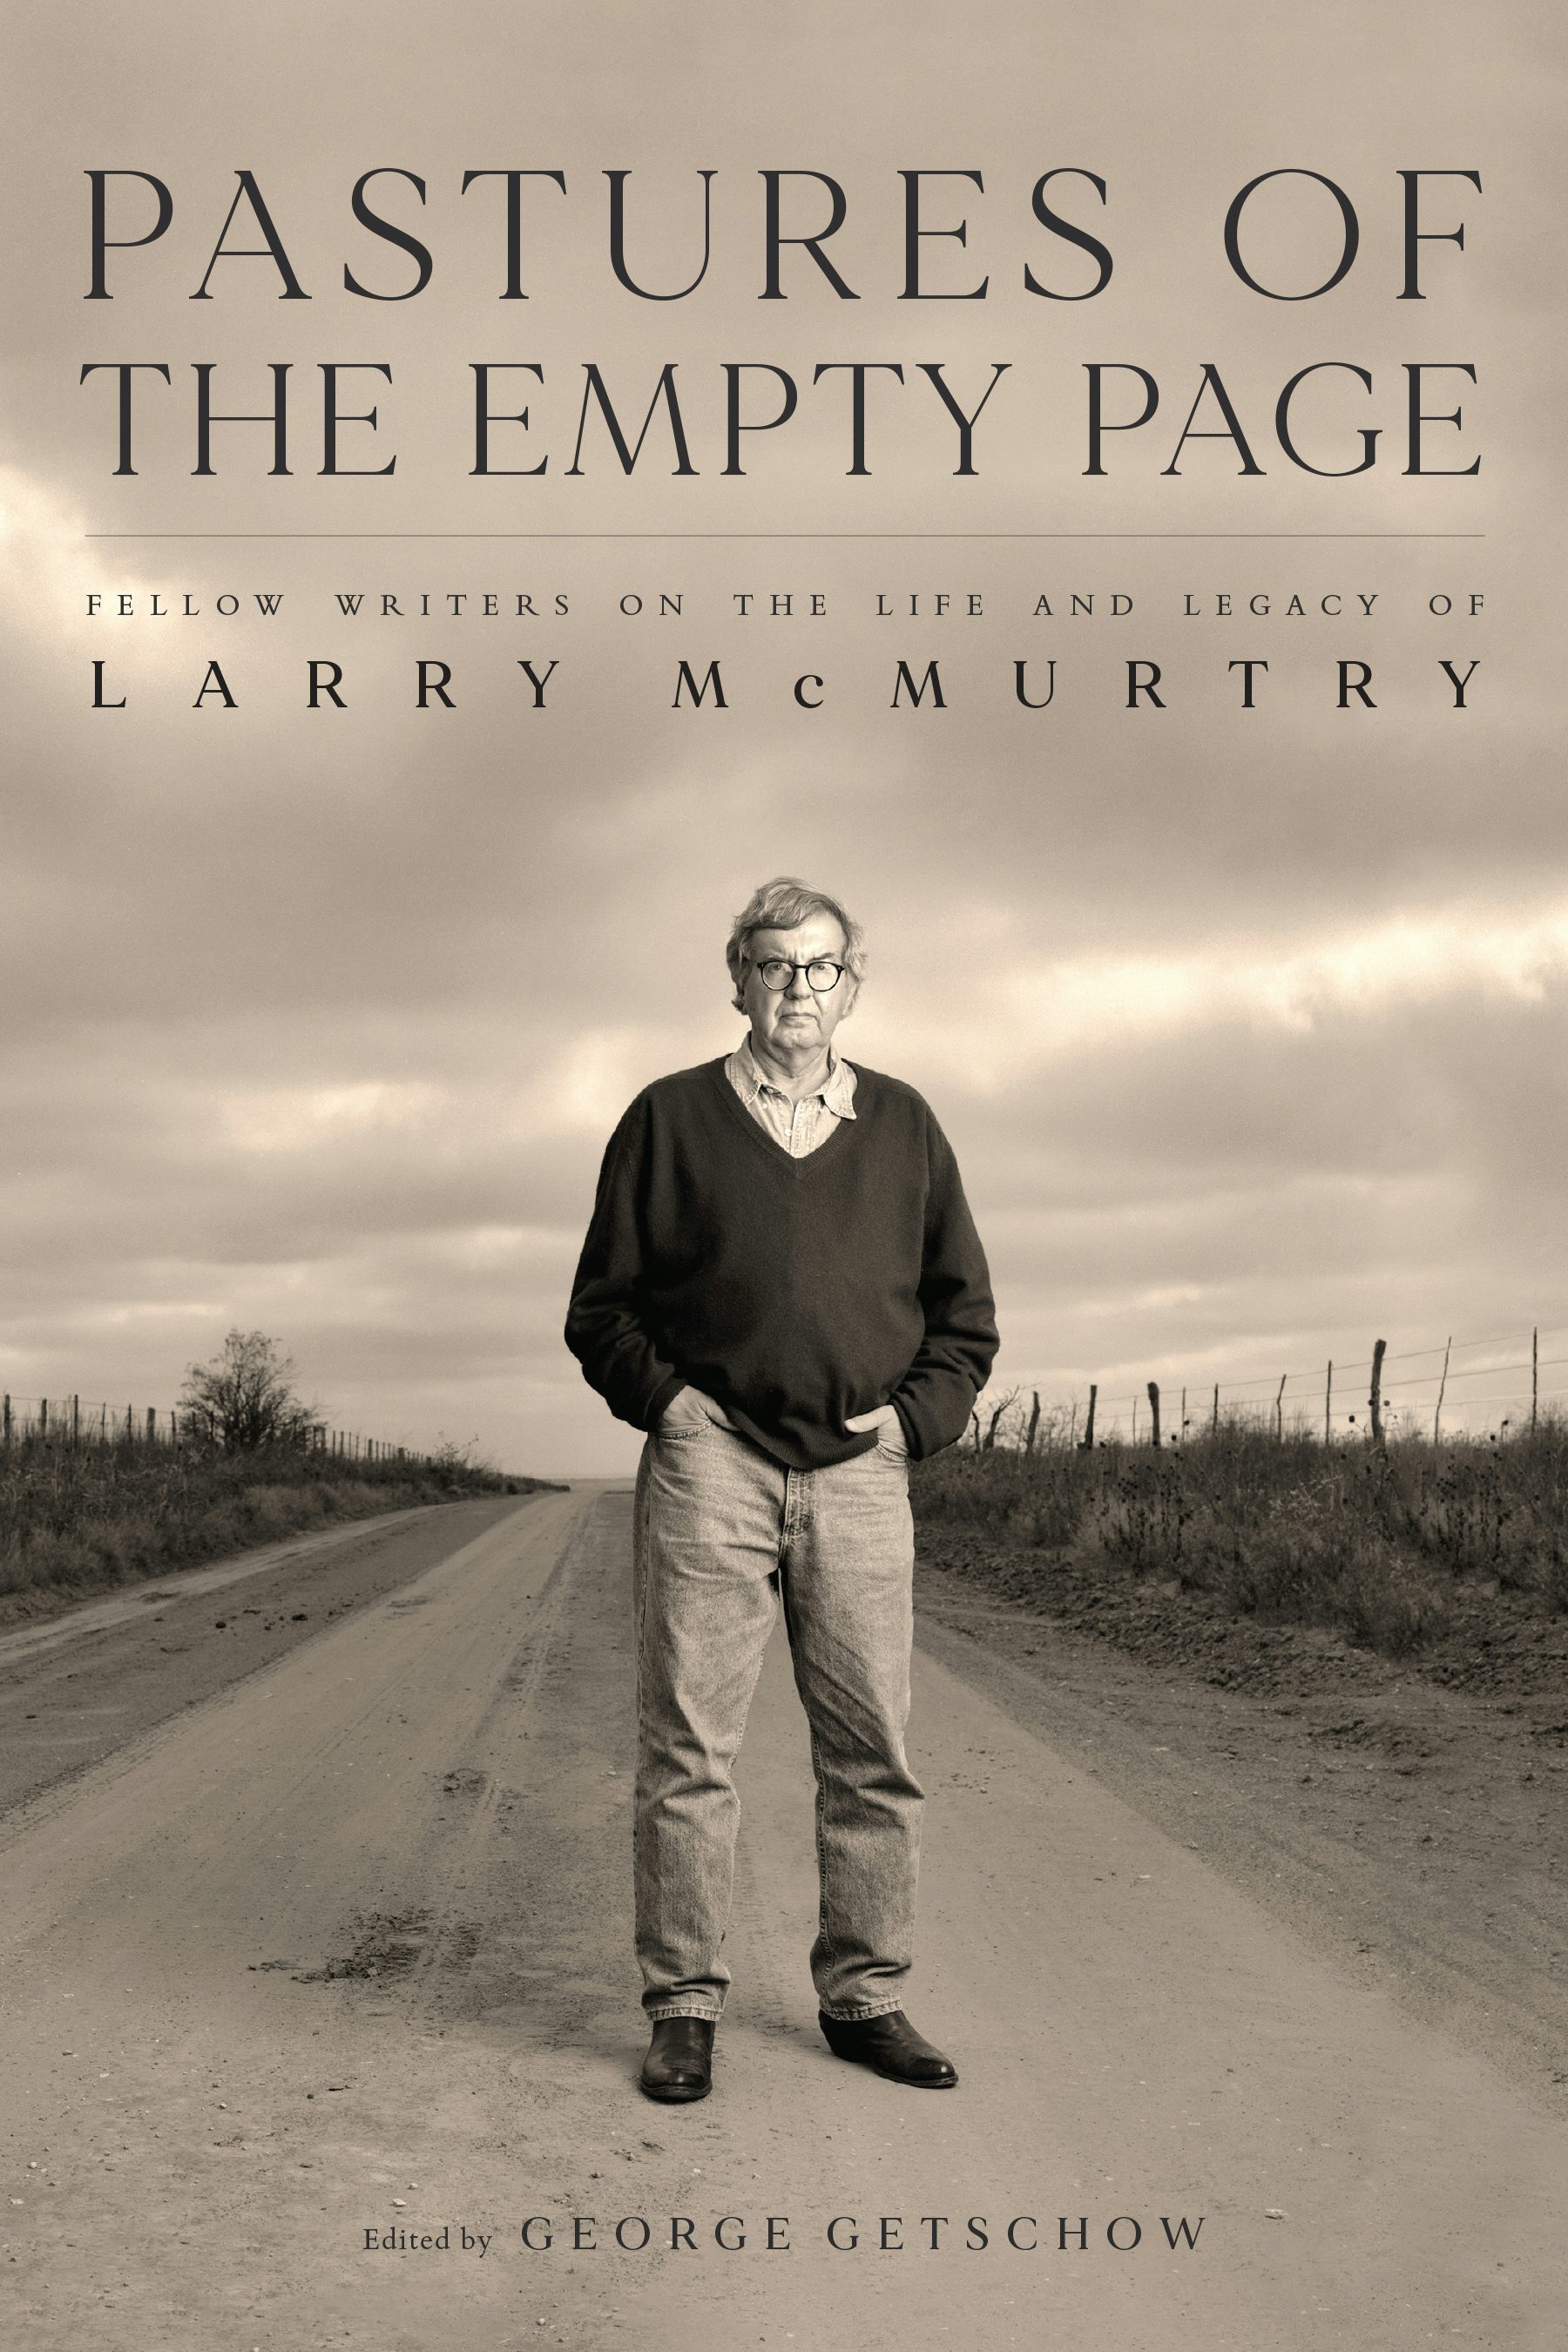 Pastures of the Empty Page: Fellow Writers on the Life and Legacy of Larry McMurtry
